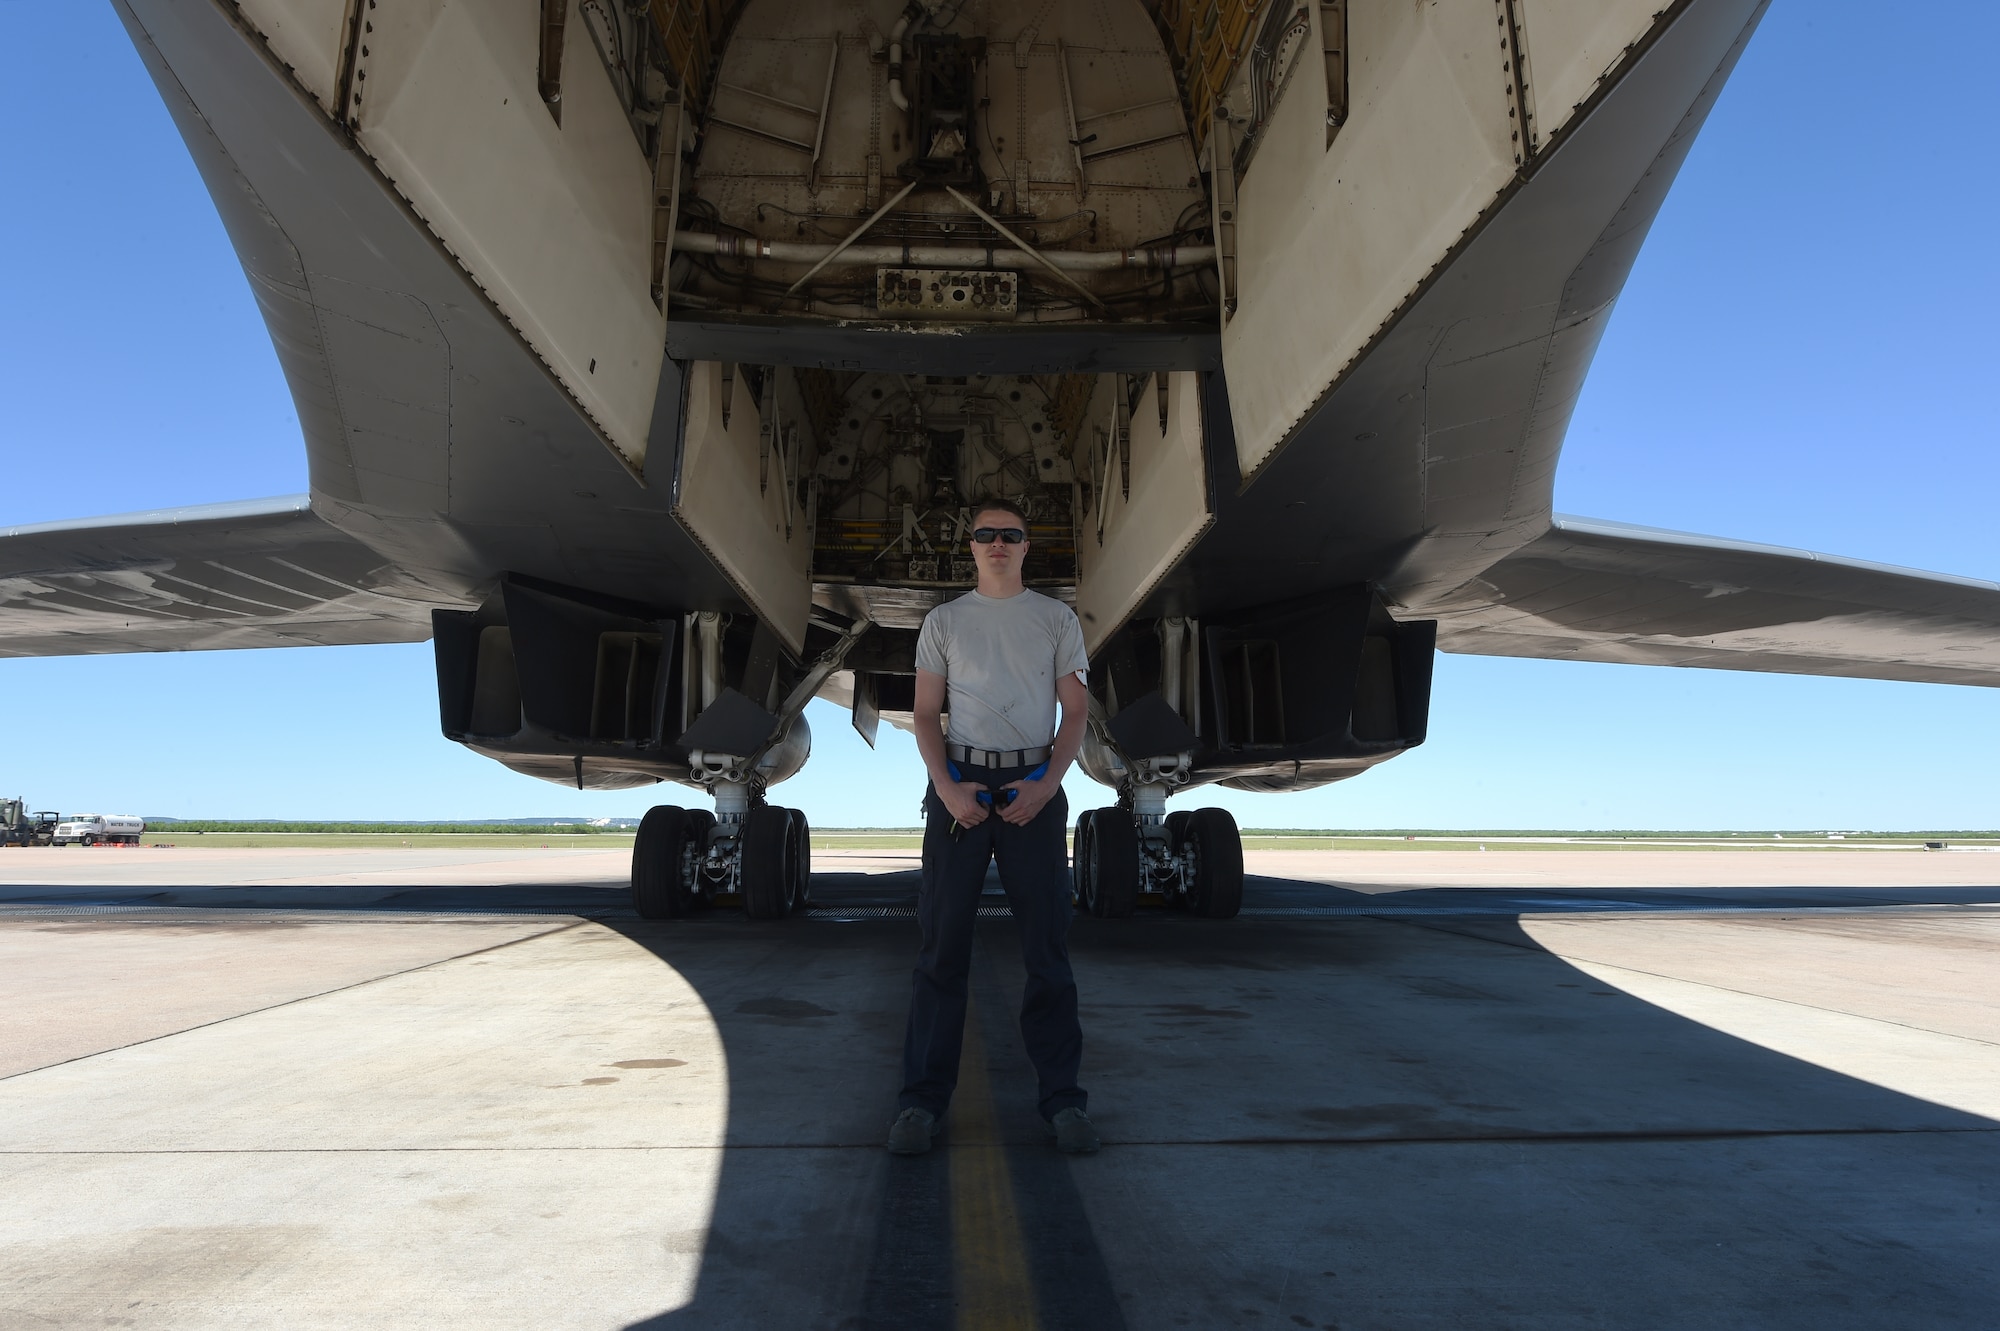 U.S. Air Force Senior Airman Jason Stach, 28th Aircraft Maintenance Unit B-1 aircraft technician, stands in the shade of a B-1B Lancer May 3, 2016, at Dyess Air Force Base, Texas. Stach, who is from Jasper, Florida, joined the Air Force in September 2012. After eight weeks of basic training and a four-month technical school, Stach received orders to be stationed at Dyess and has been here since March 2013. (U.S. Air Force photo by Senior Airman Alexander Guerrero/Released)